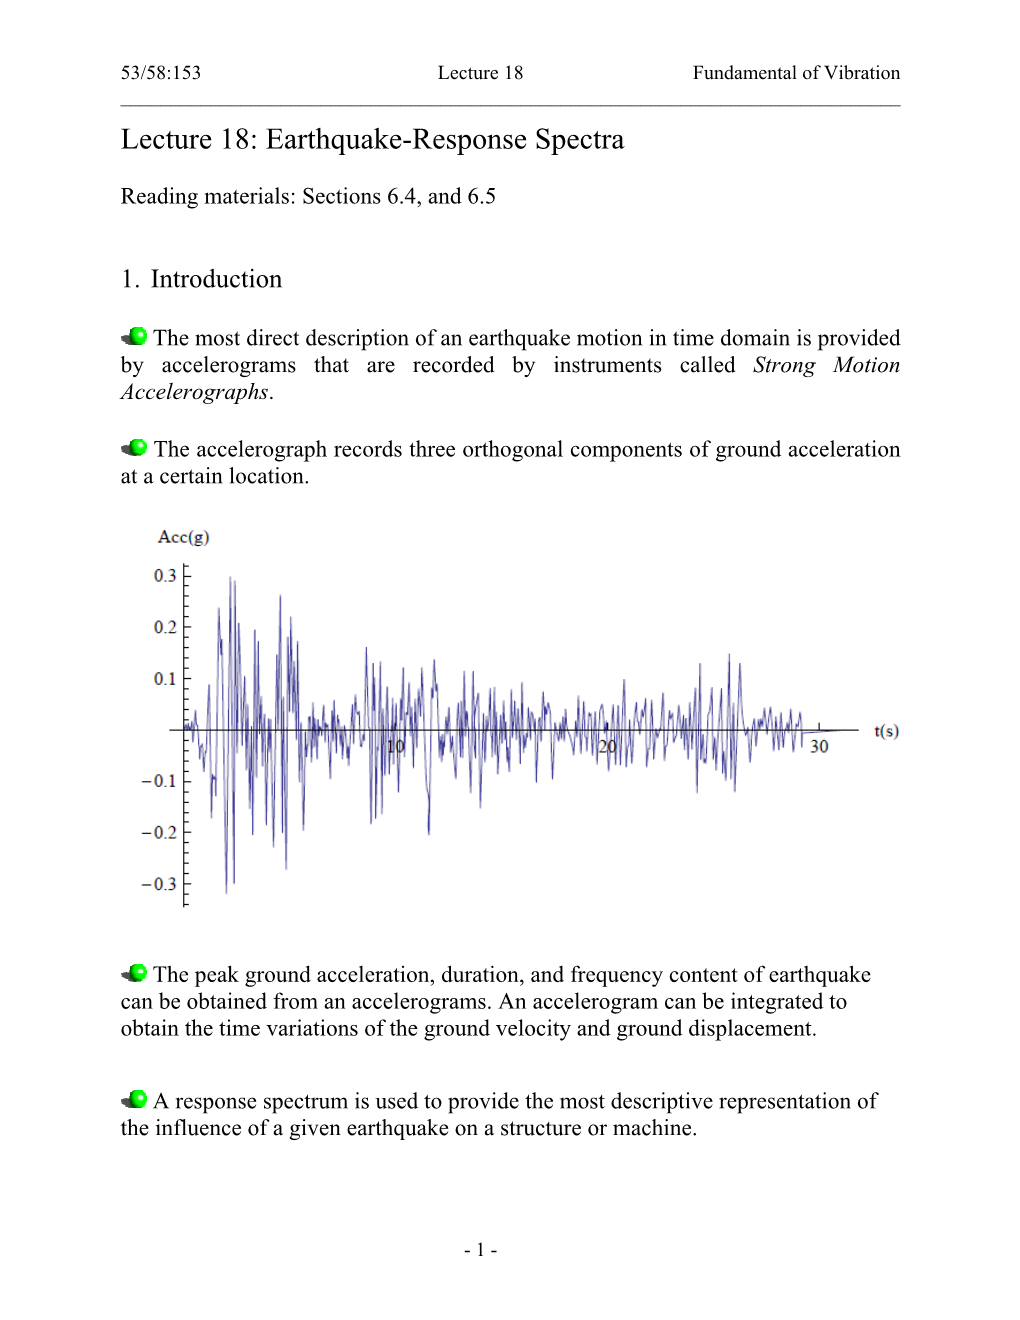 Lecture 18: Earthquake-Response Spectra